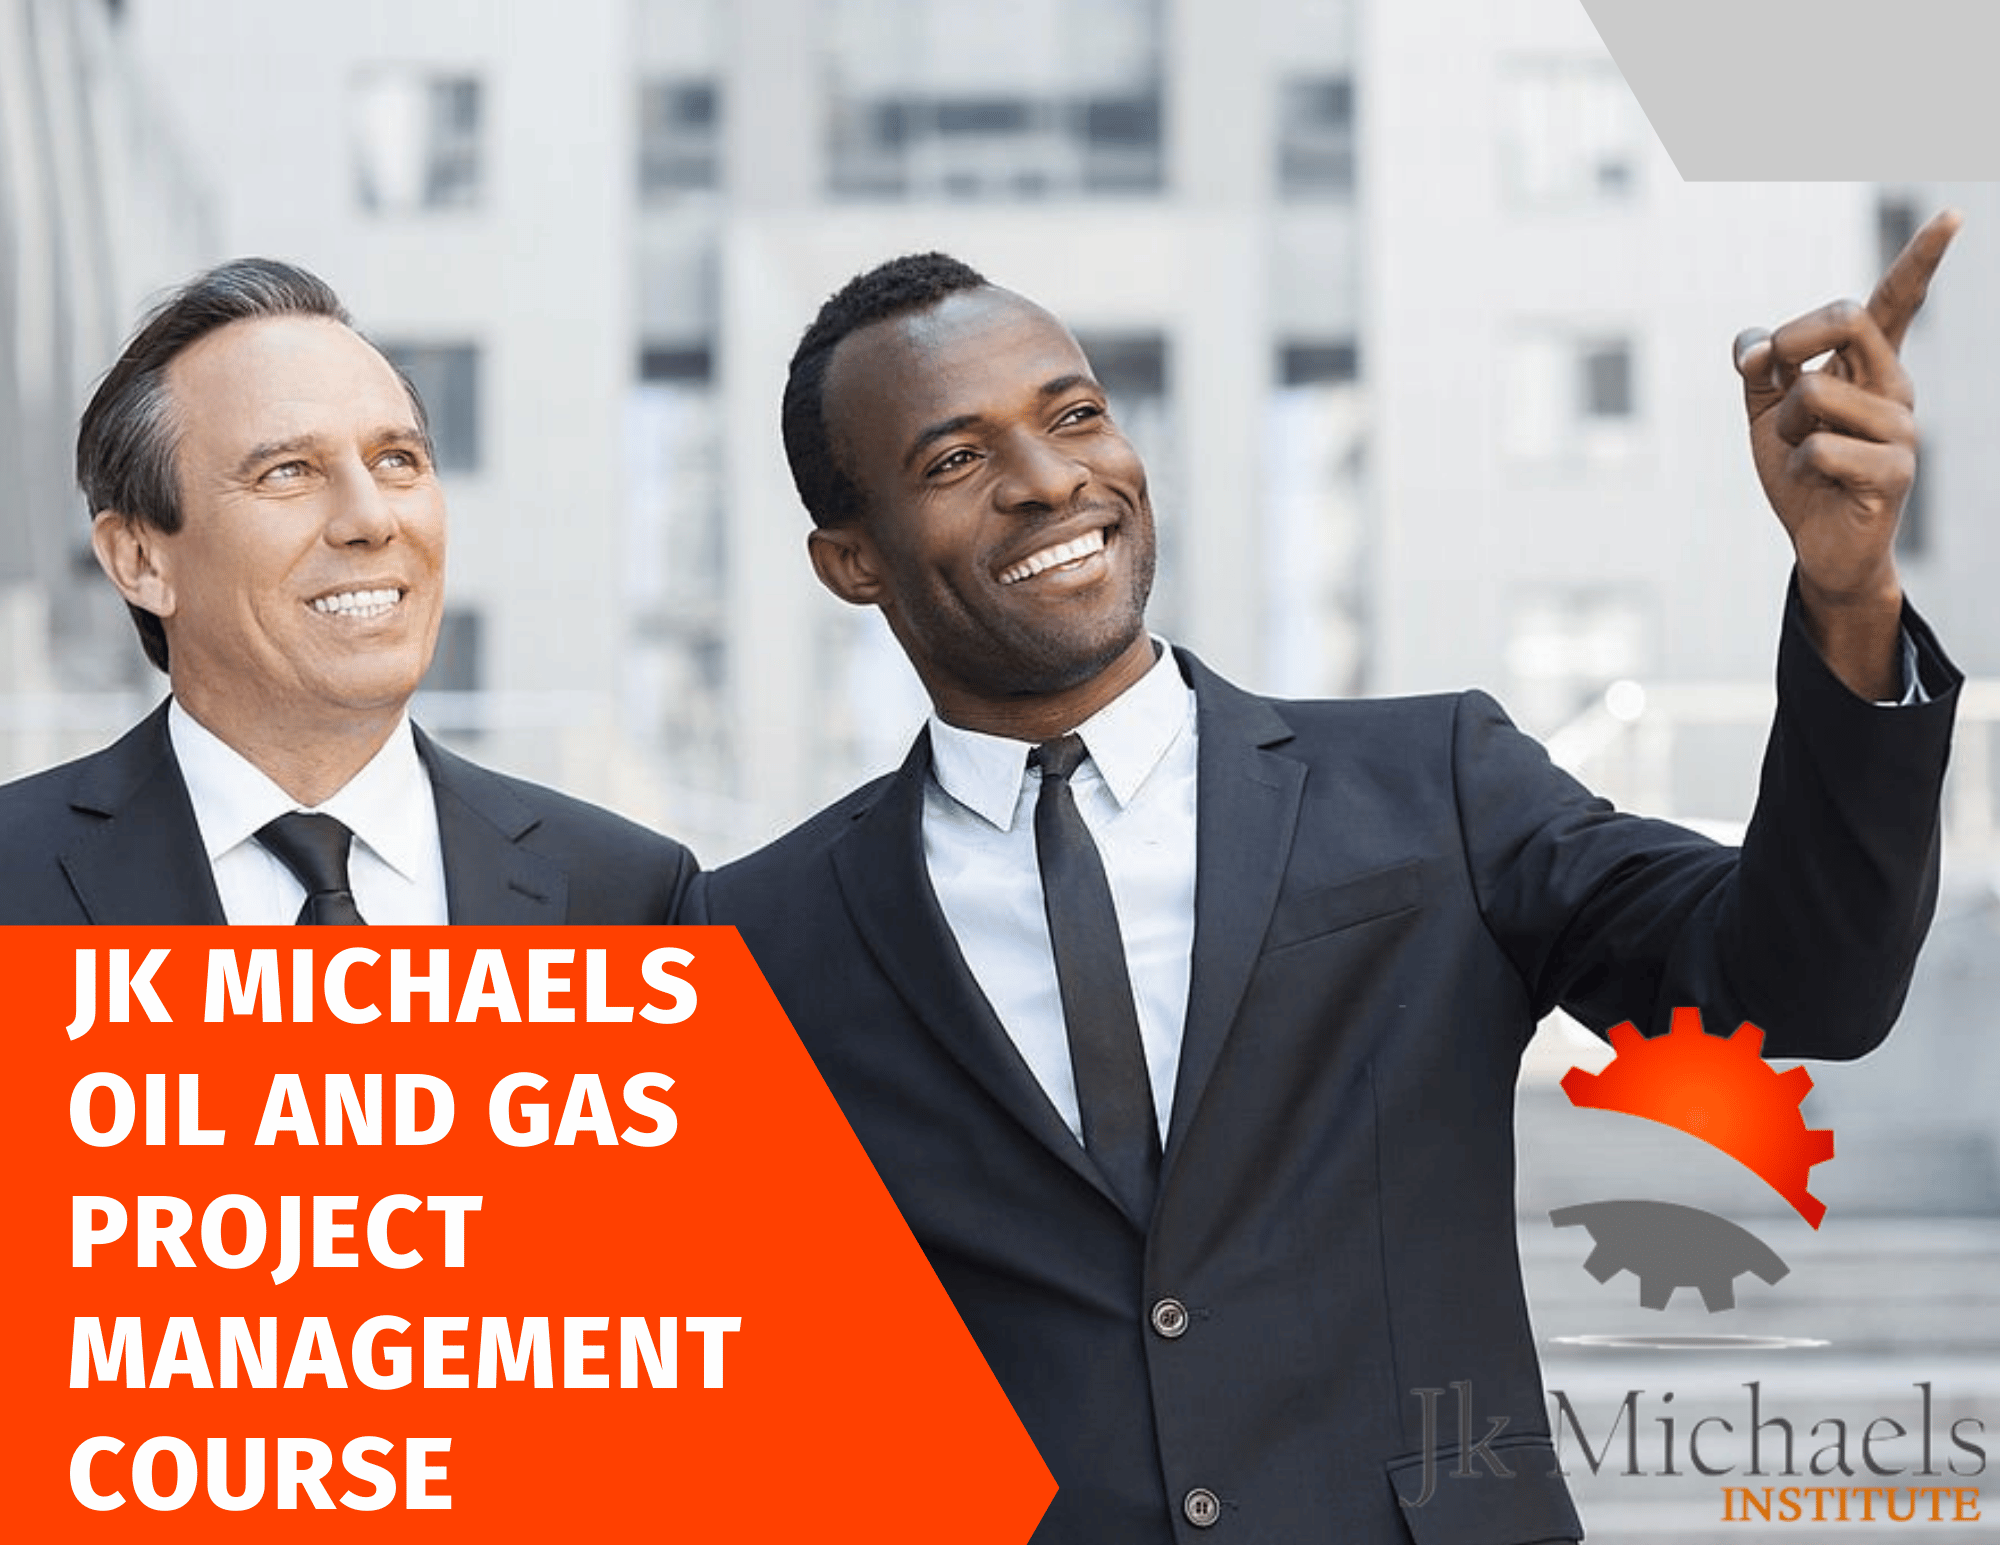 OIL-AND-GAS-PROJECT-MANAGEMENT-COURSE-1